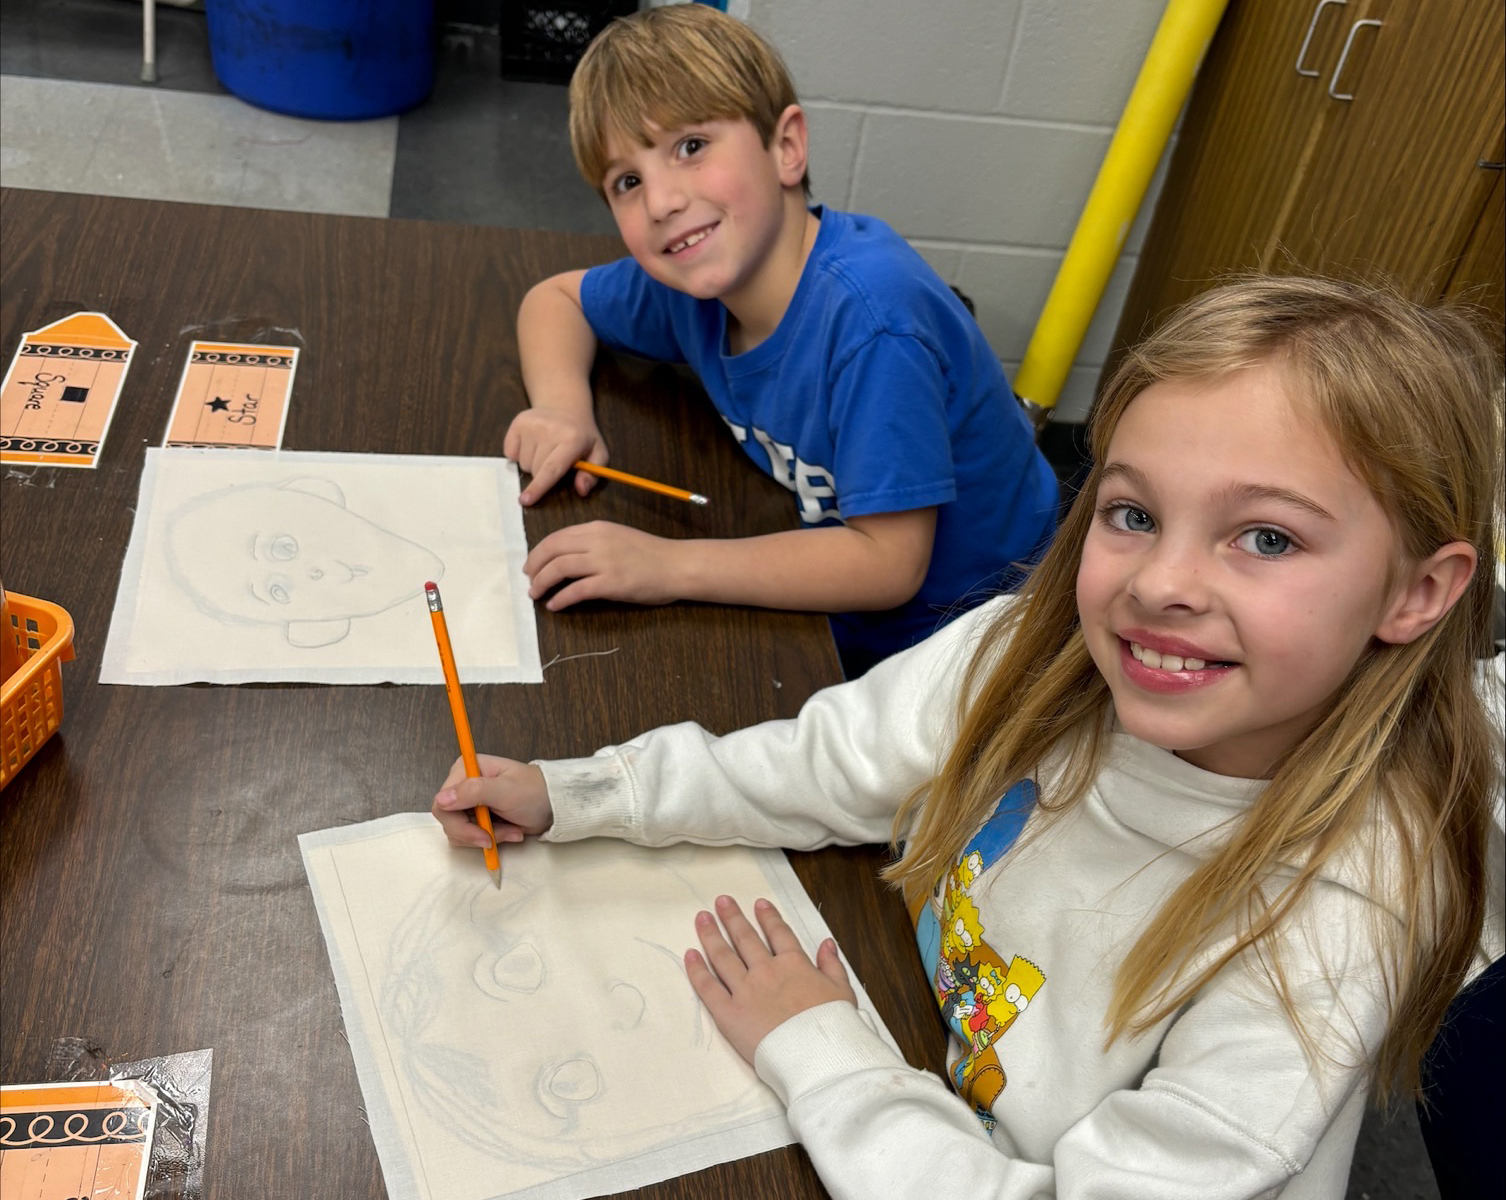 Two students draw on quilt squares